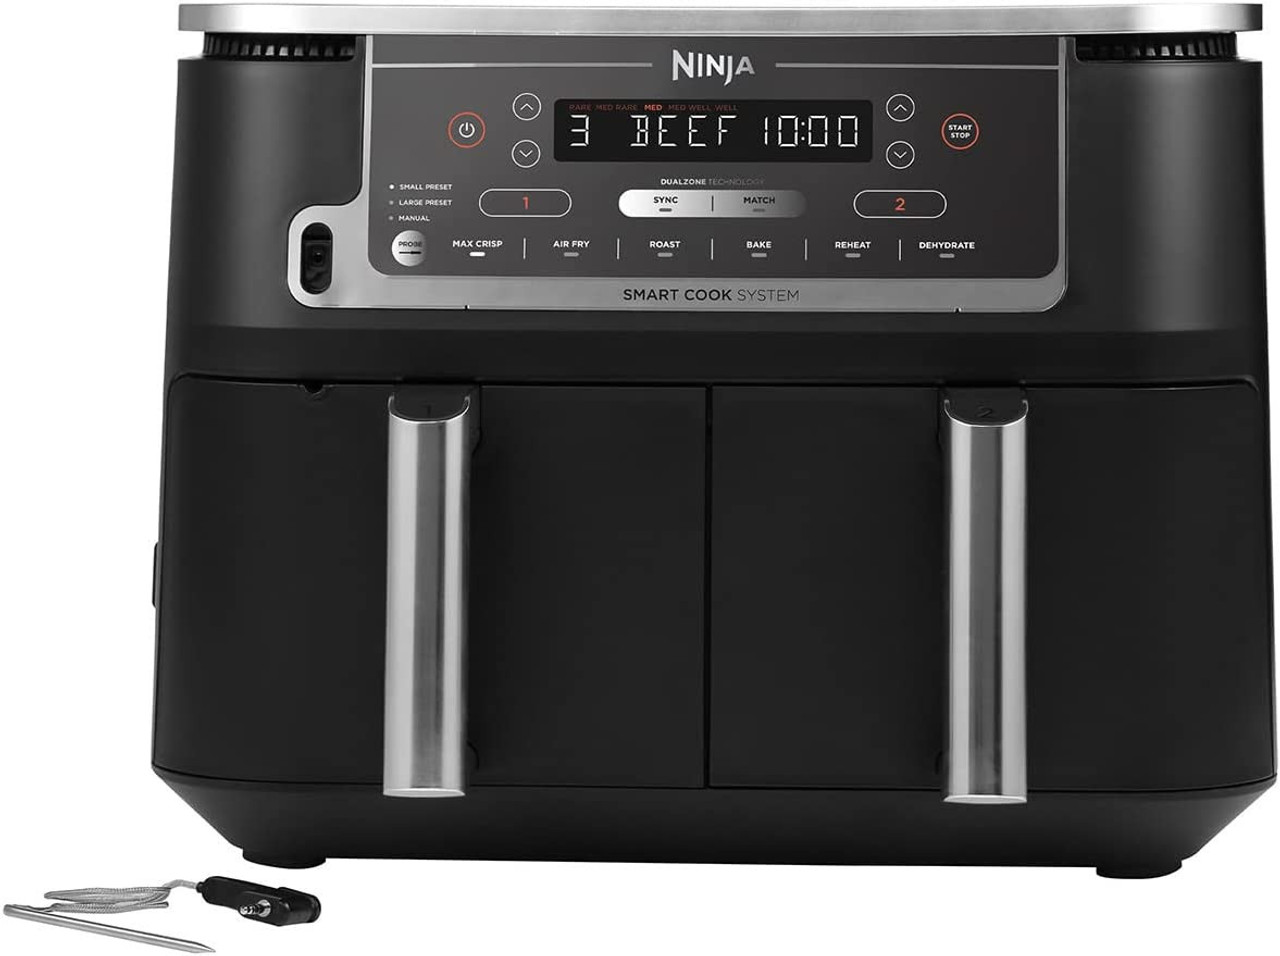 Is the sellout Ninja Foodi MAX Dual Zone AF400UK air fryer any good? We  tested it to find out